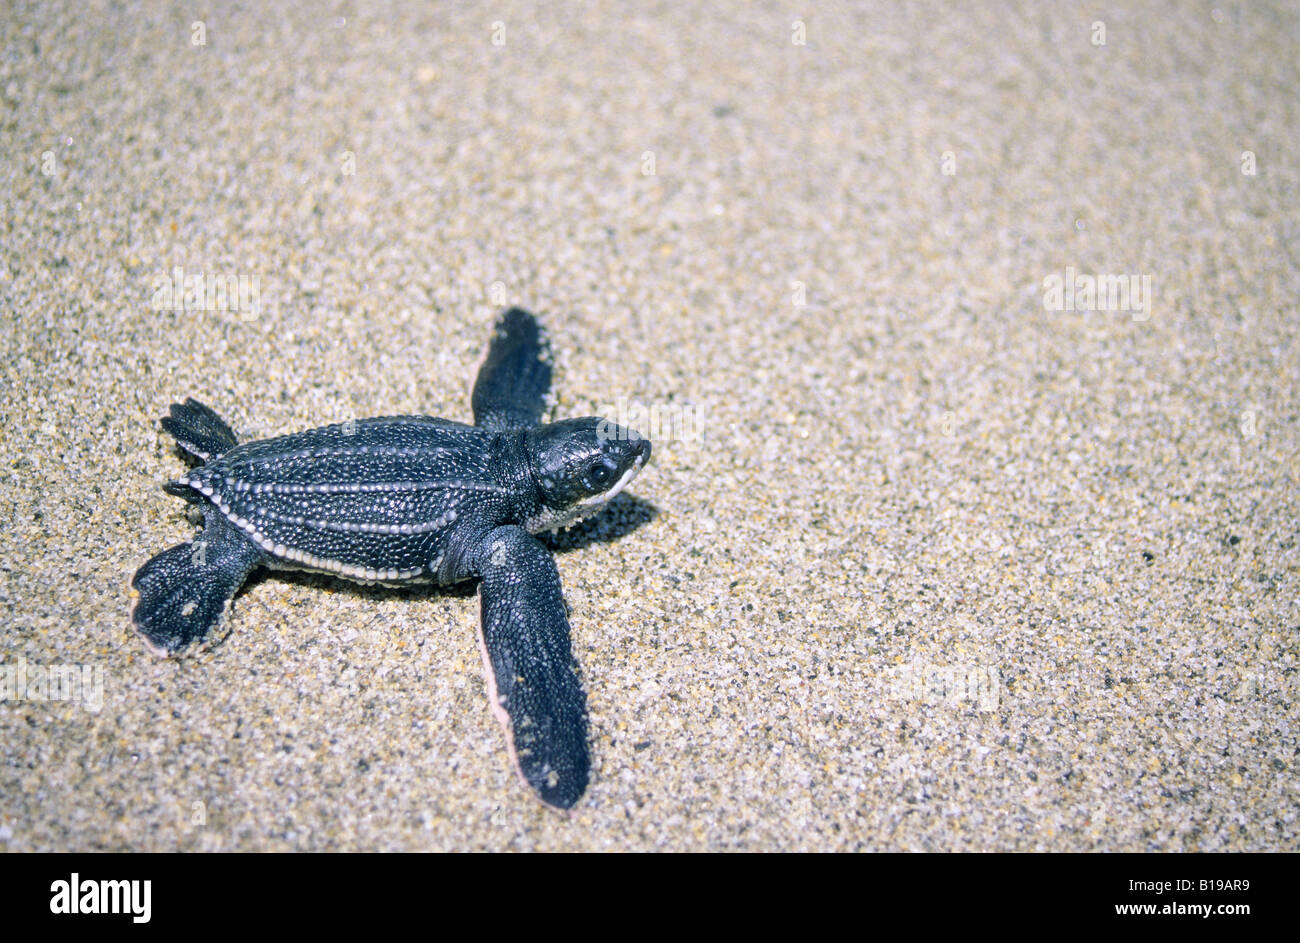 Hatchling leatherback sea turtel (Dermochelys coriacea) heading to the ocean after hatching, Trinidad, West Indies Stock Photo